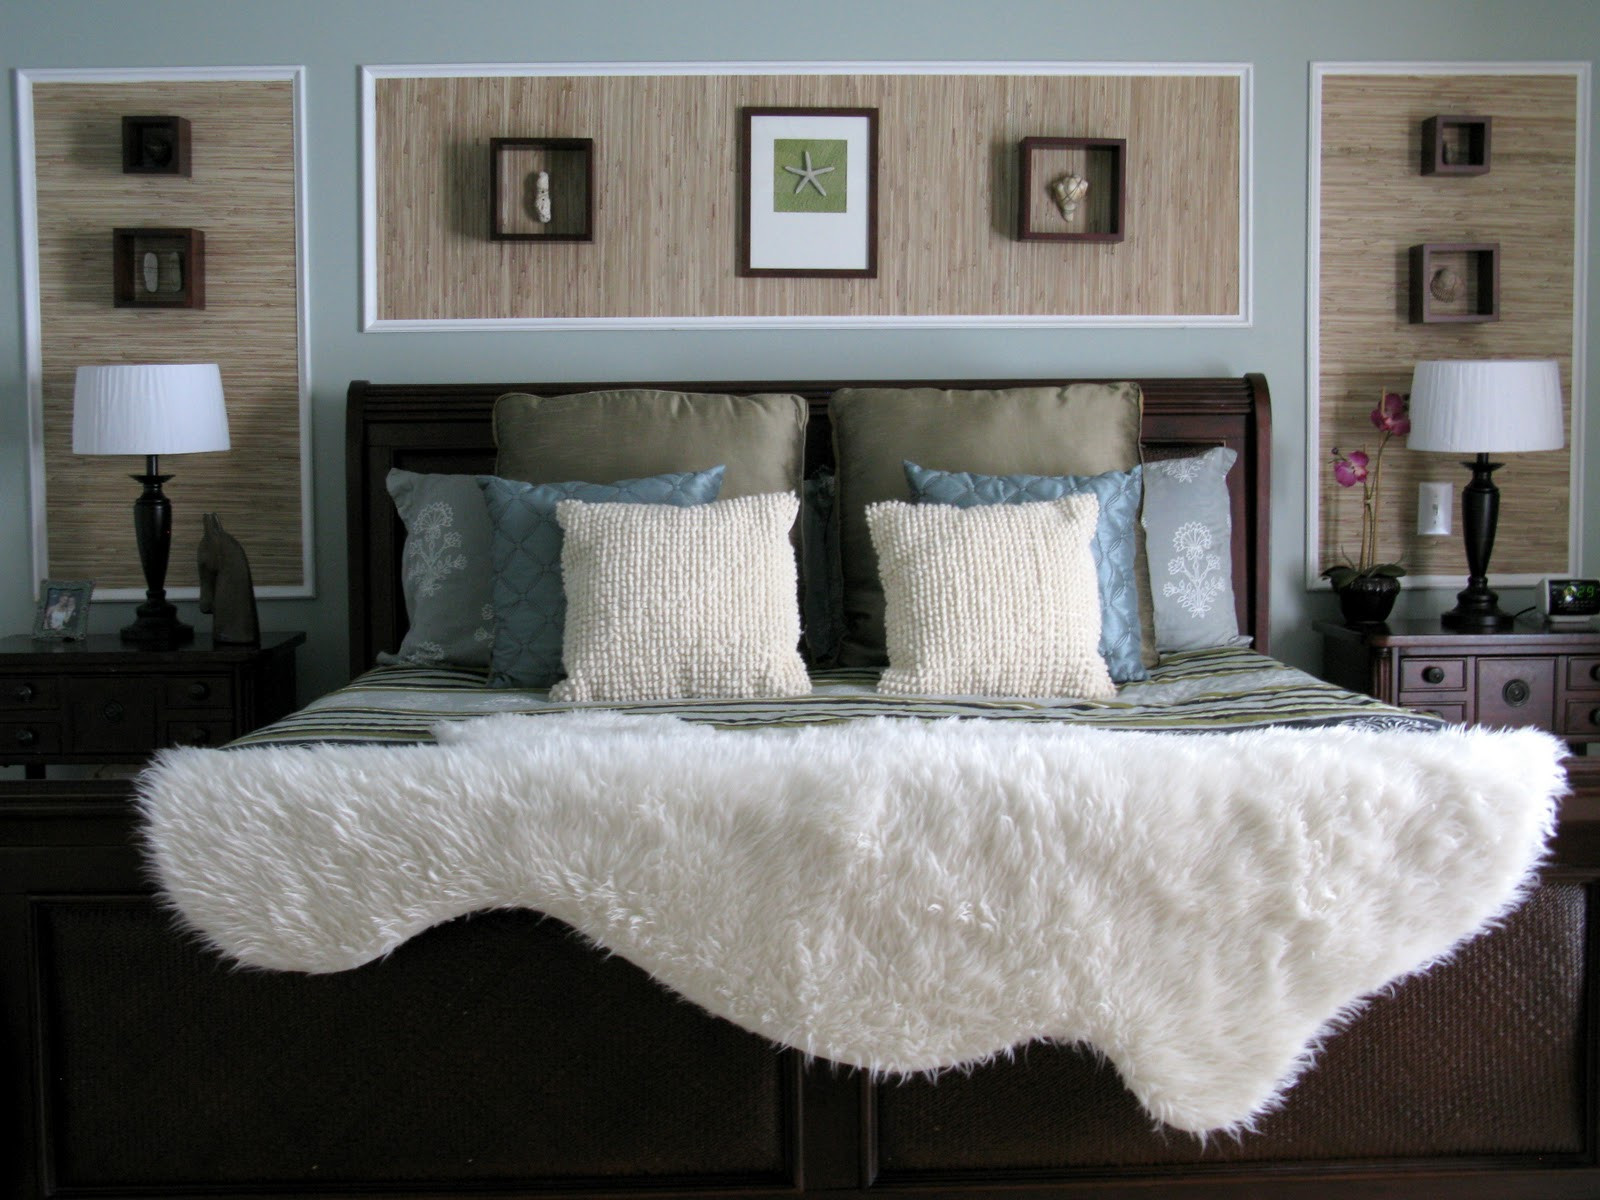 Wall Decorations For Master Bedroom
 LoveYourRoom Voted e of the Top Bedrooms by Houzz